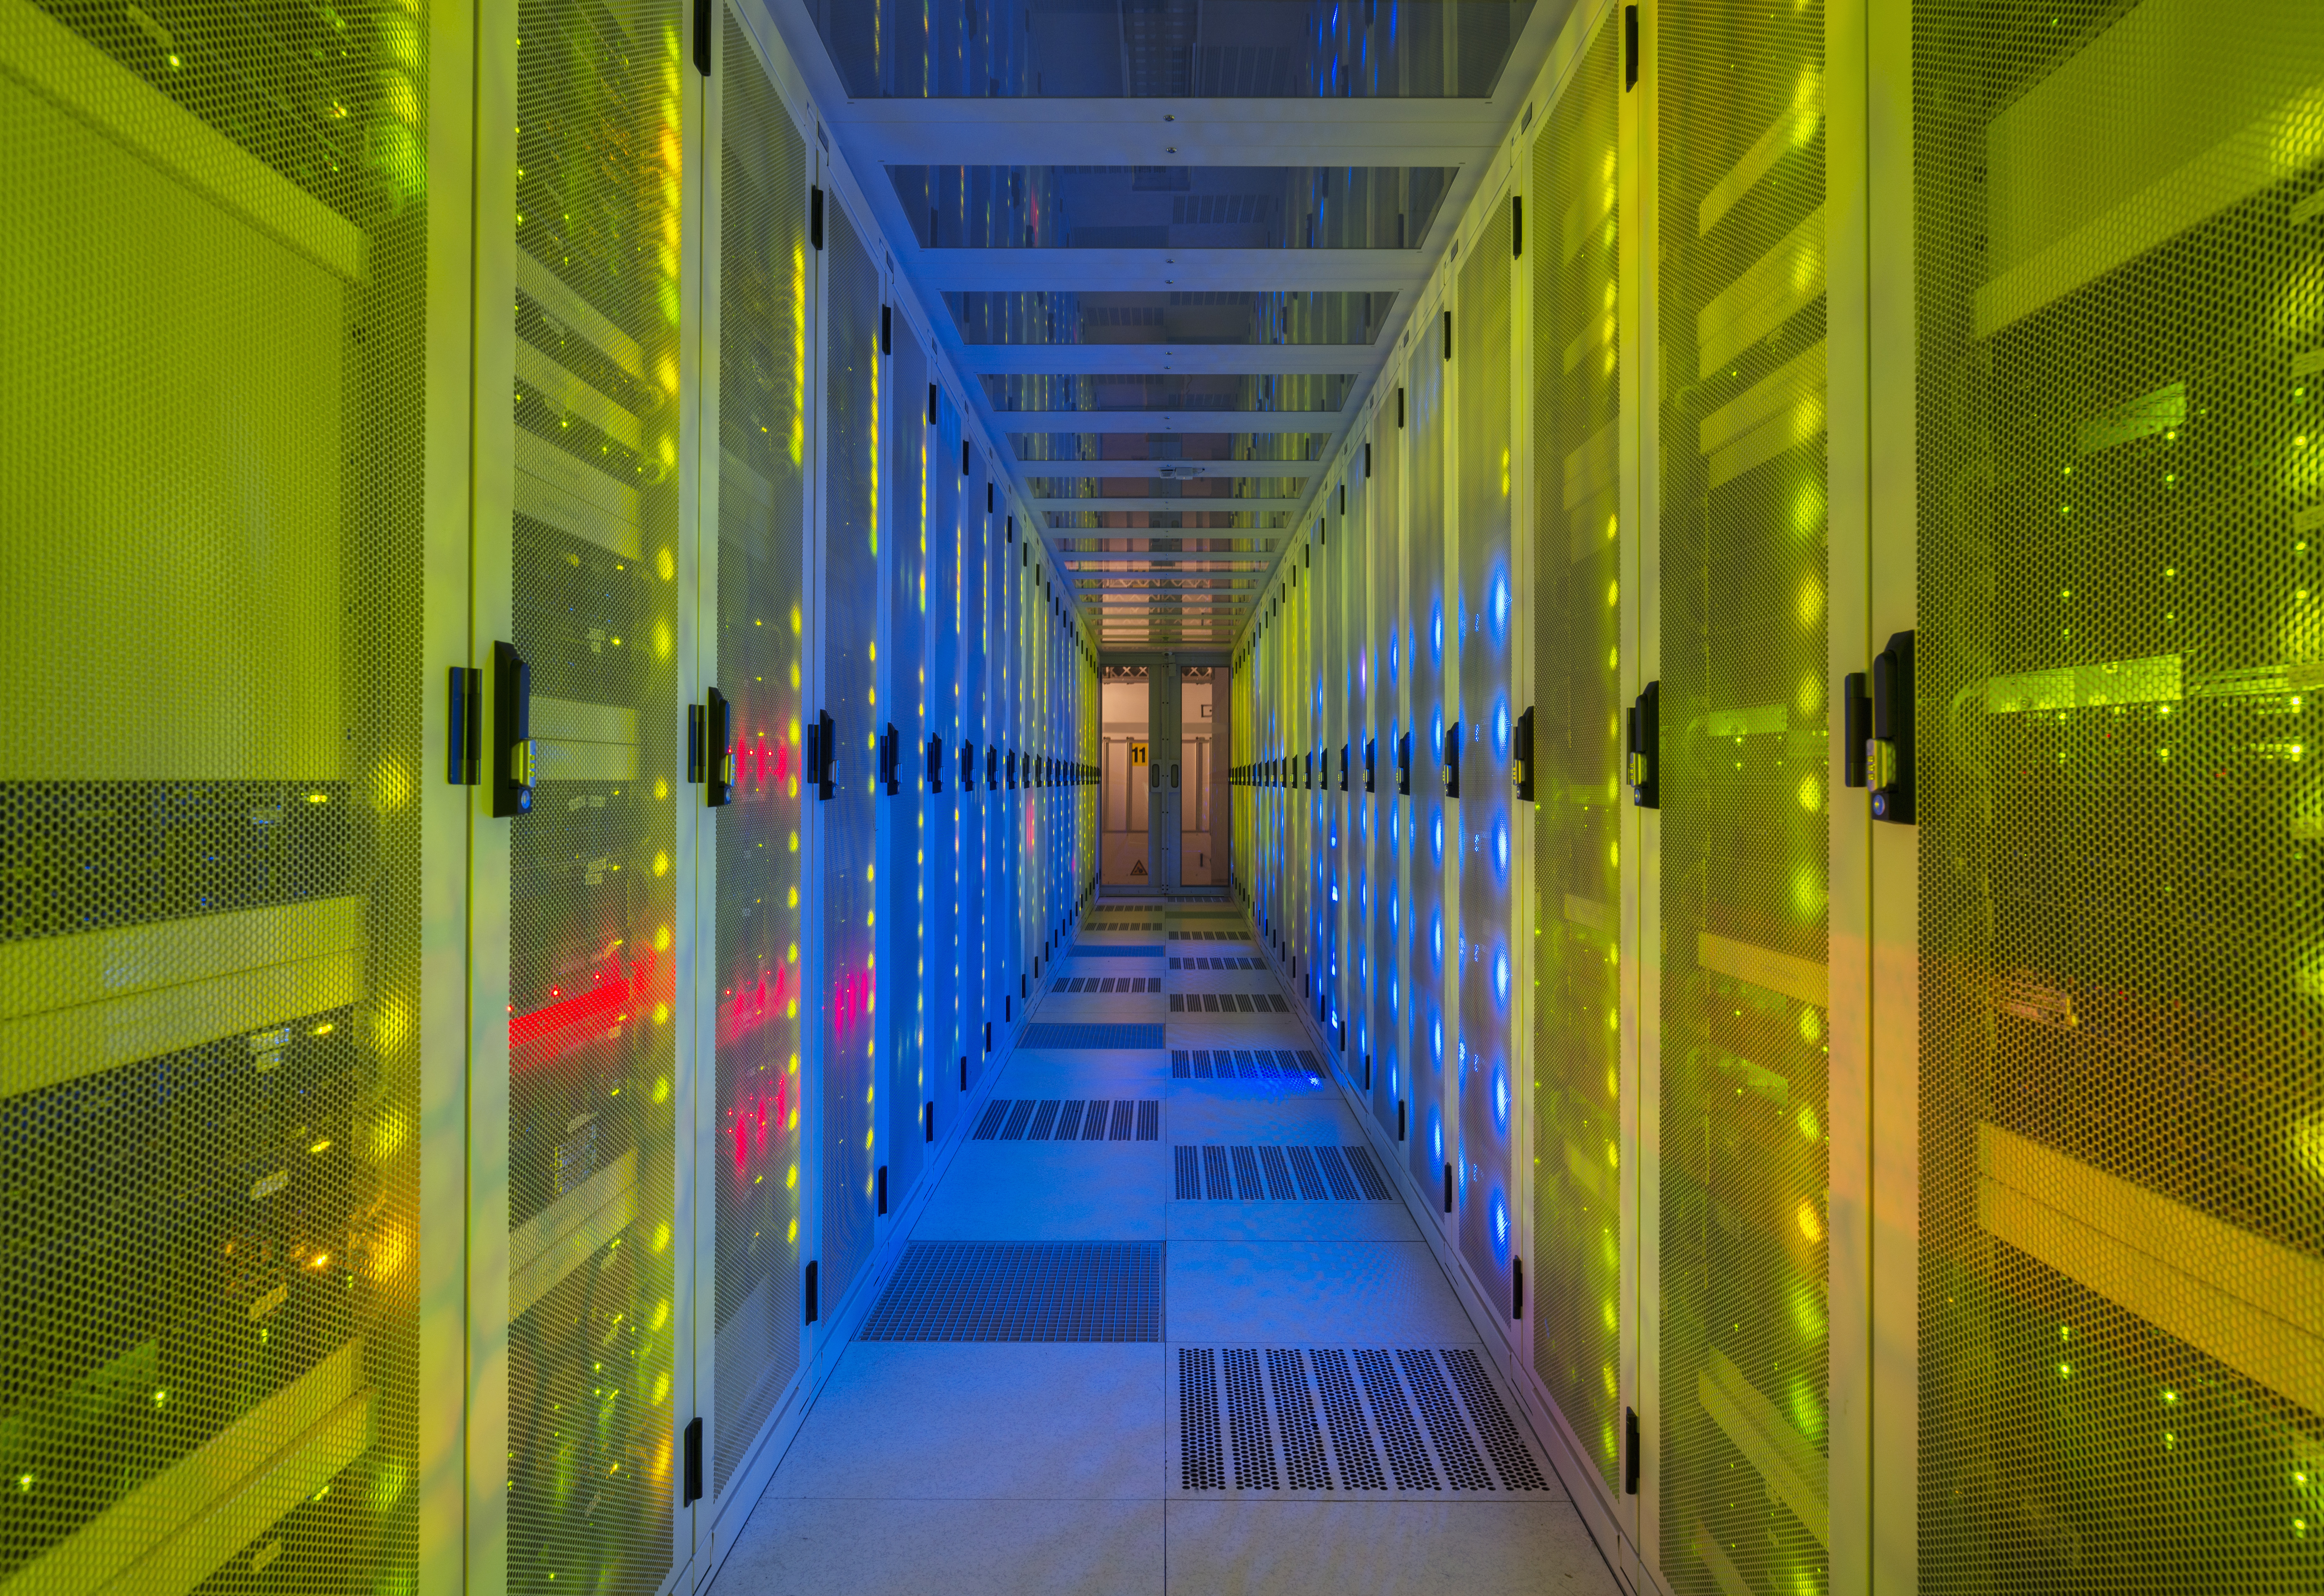 Datacenter for storing large amounts of data, and is an important hub for the internet